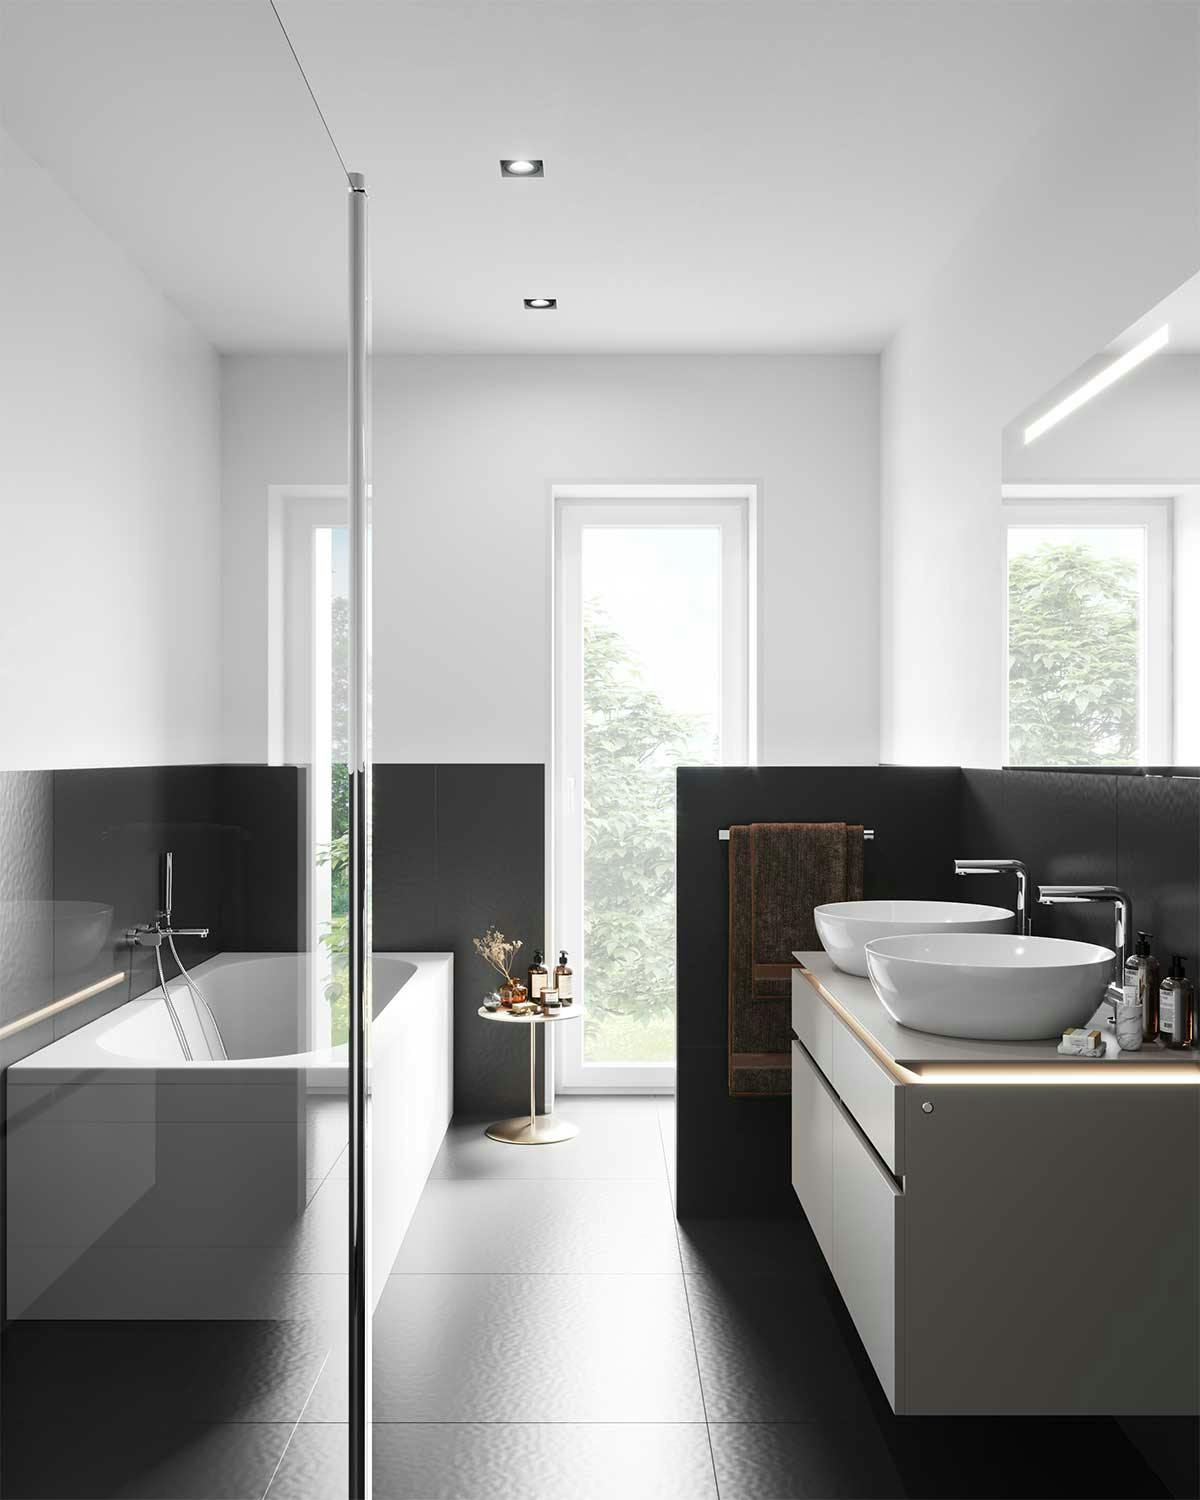 3D Interior Visualization with the design concept of a bathroom in a double house in Germany.